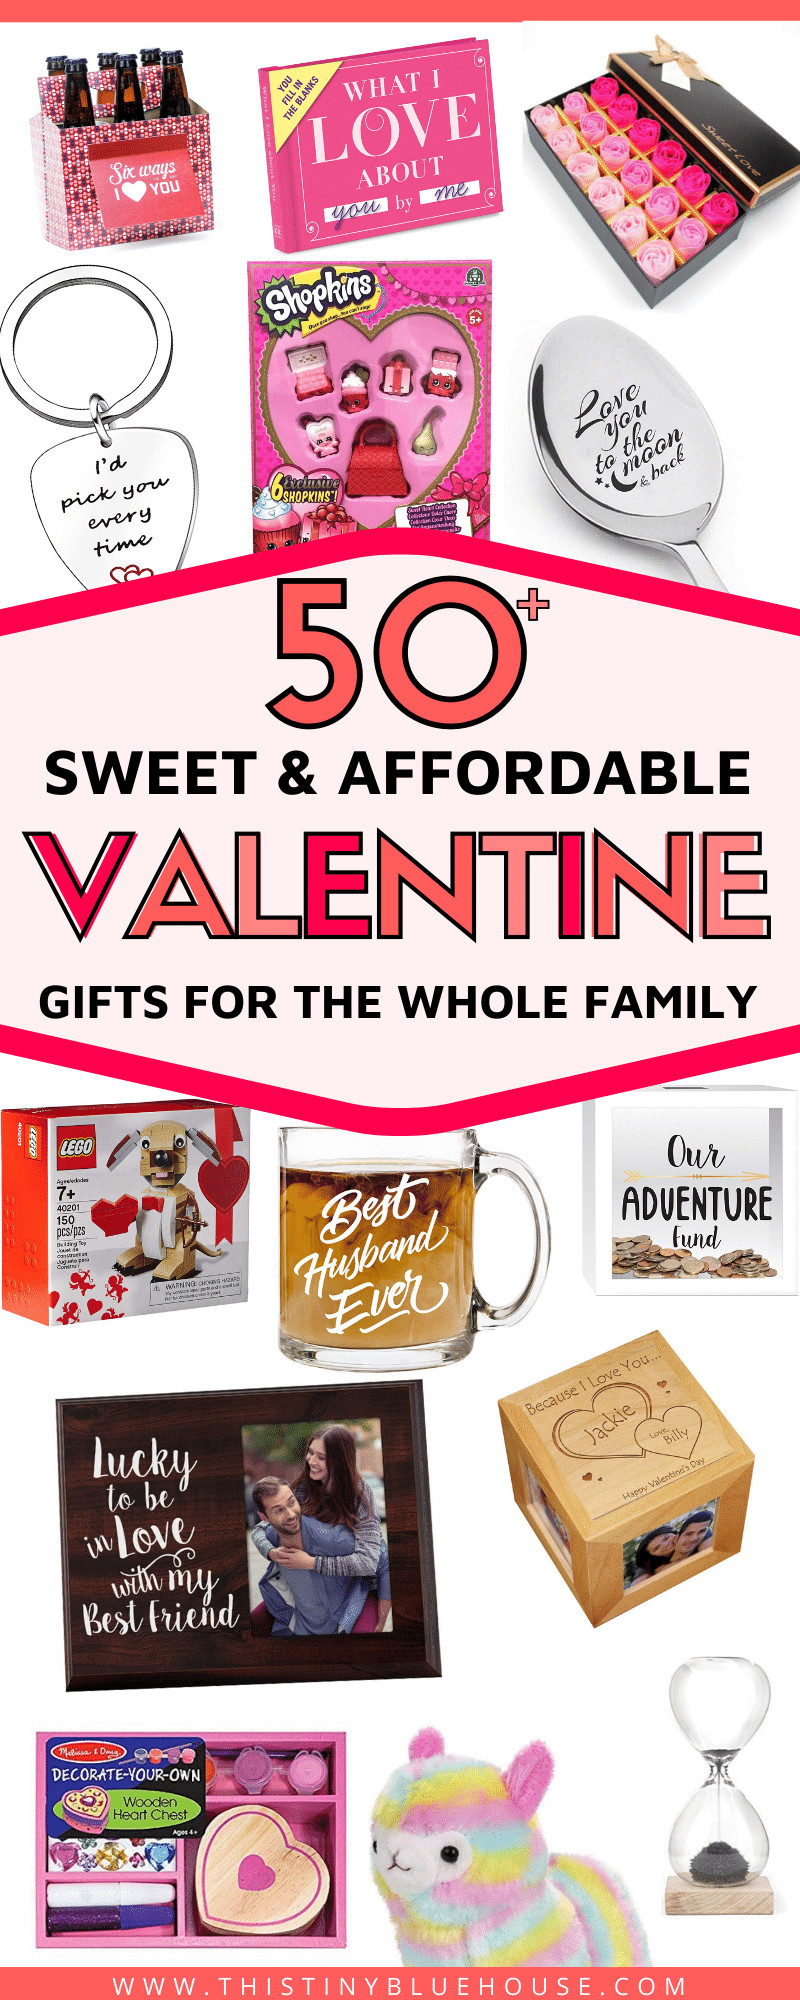 Valentines Cheap Gift Ideas
 50 Inexpensive Valentine s Day Gift Ideas This Tiny Blue